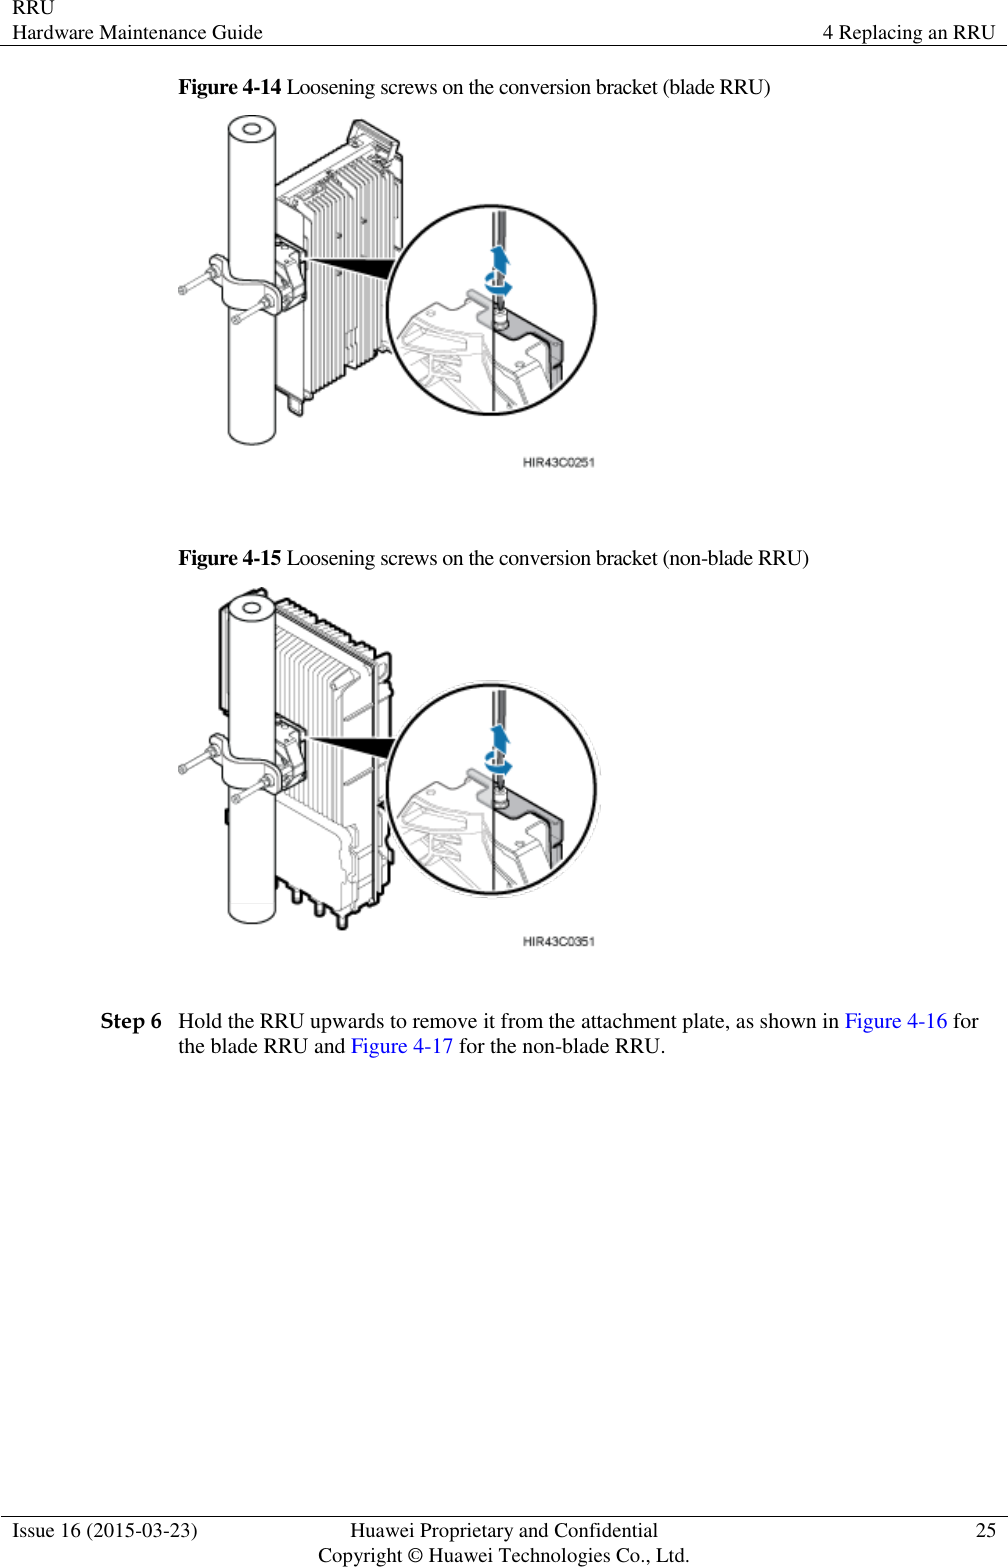 RRU Hardware Maintenance Guide 4 Replacing an RRU  Issue 16 (2015-03-23) Huawei Proprietary and Confidential                                     Copyright © Huawei Technologies Co., Ltd. 25  Figure 4-14 Loosening screws on the conversion bracket (blade RRU)   Figure 4-15 Loosening screws on the conversion bracket (non-blade RRU)   Step 6 Hold the RRU upwards to remove it from the attachment plate, as shown in Figure 4-16 for the blade RRU and Figure 4-17 for the non-blade RRU. 